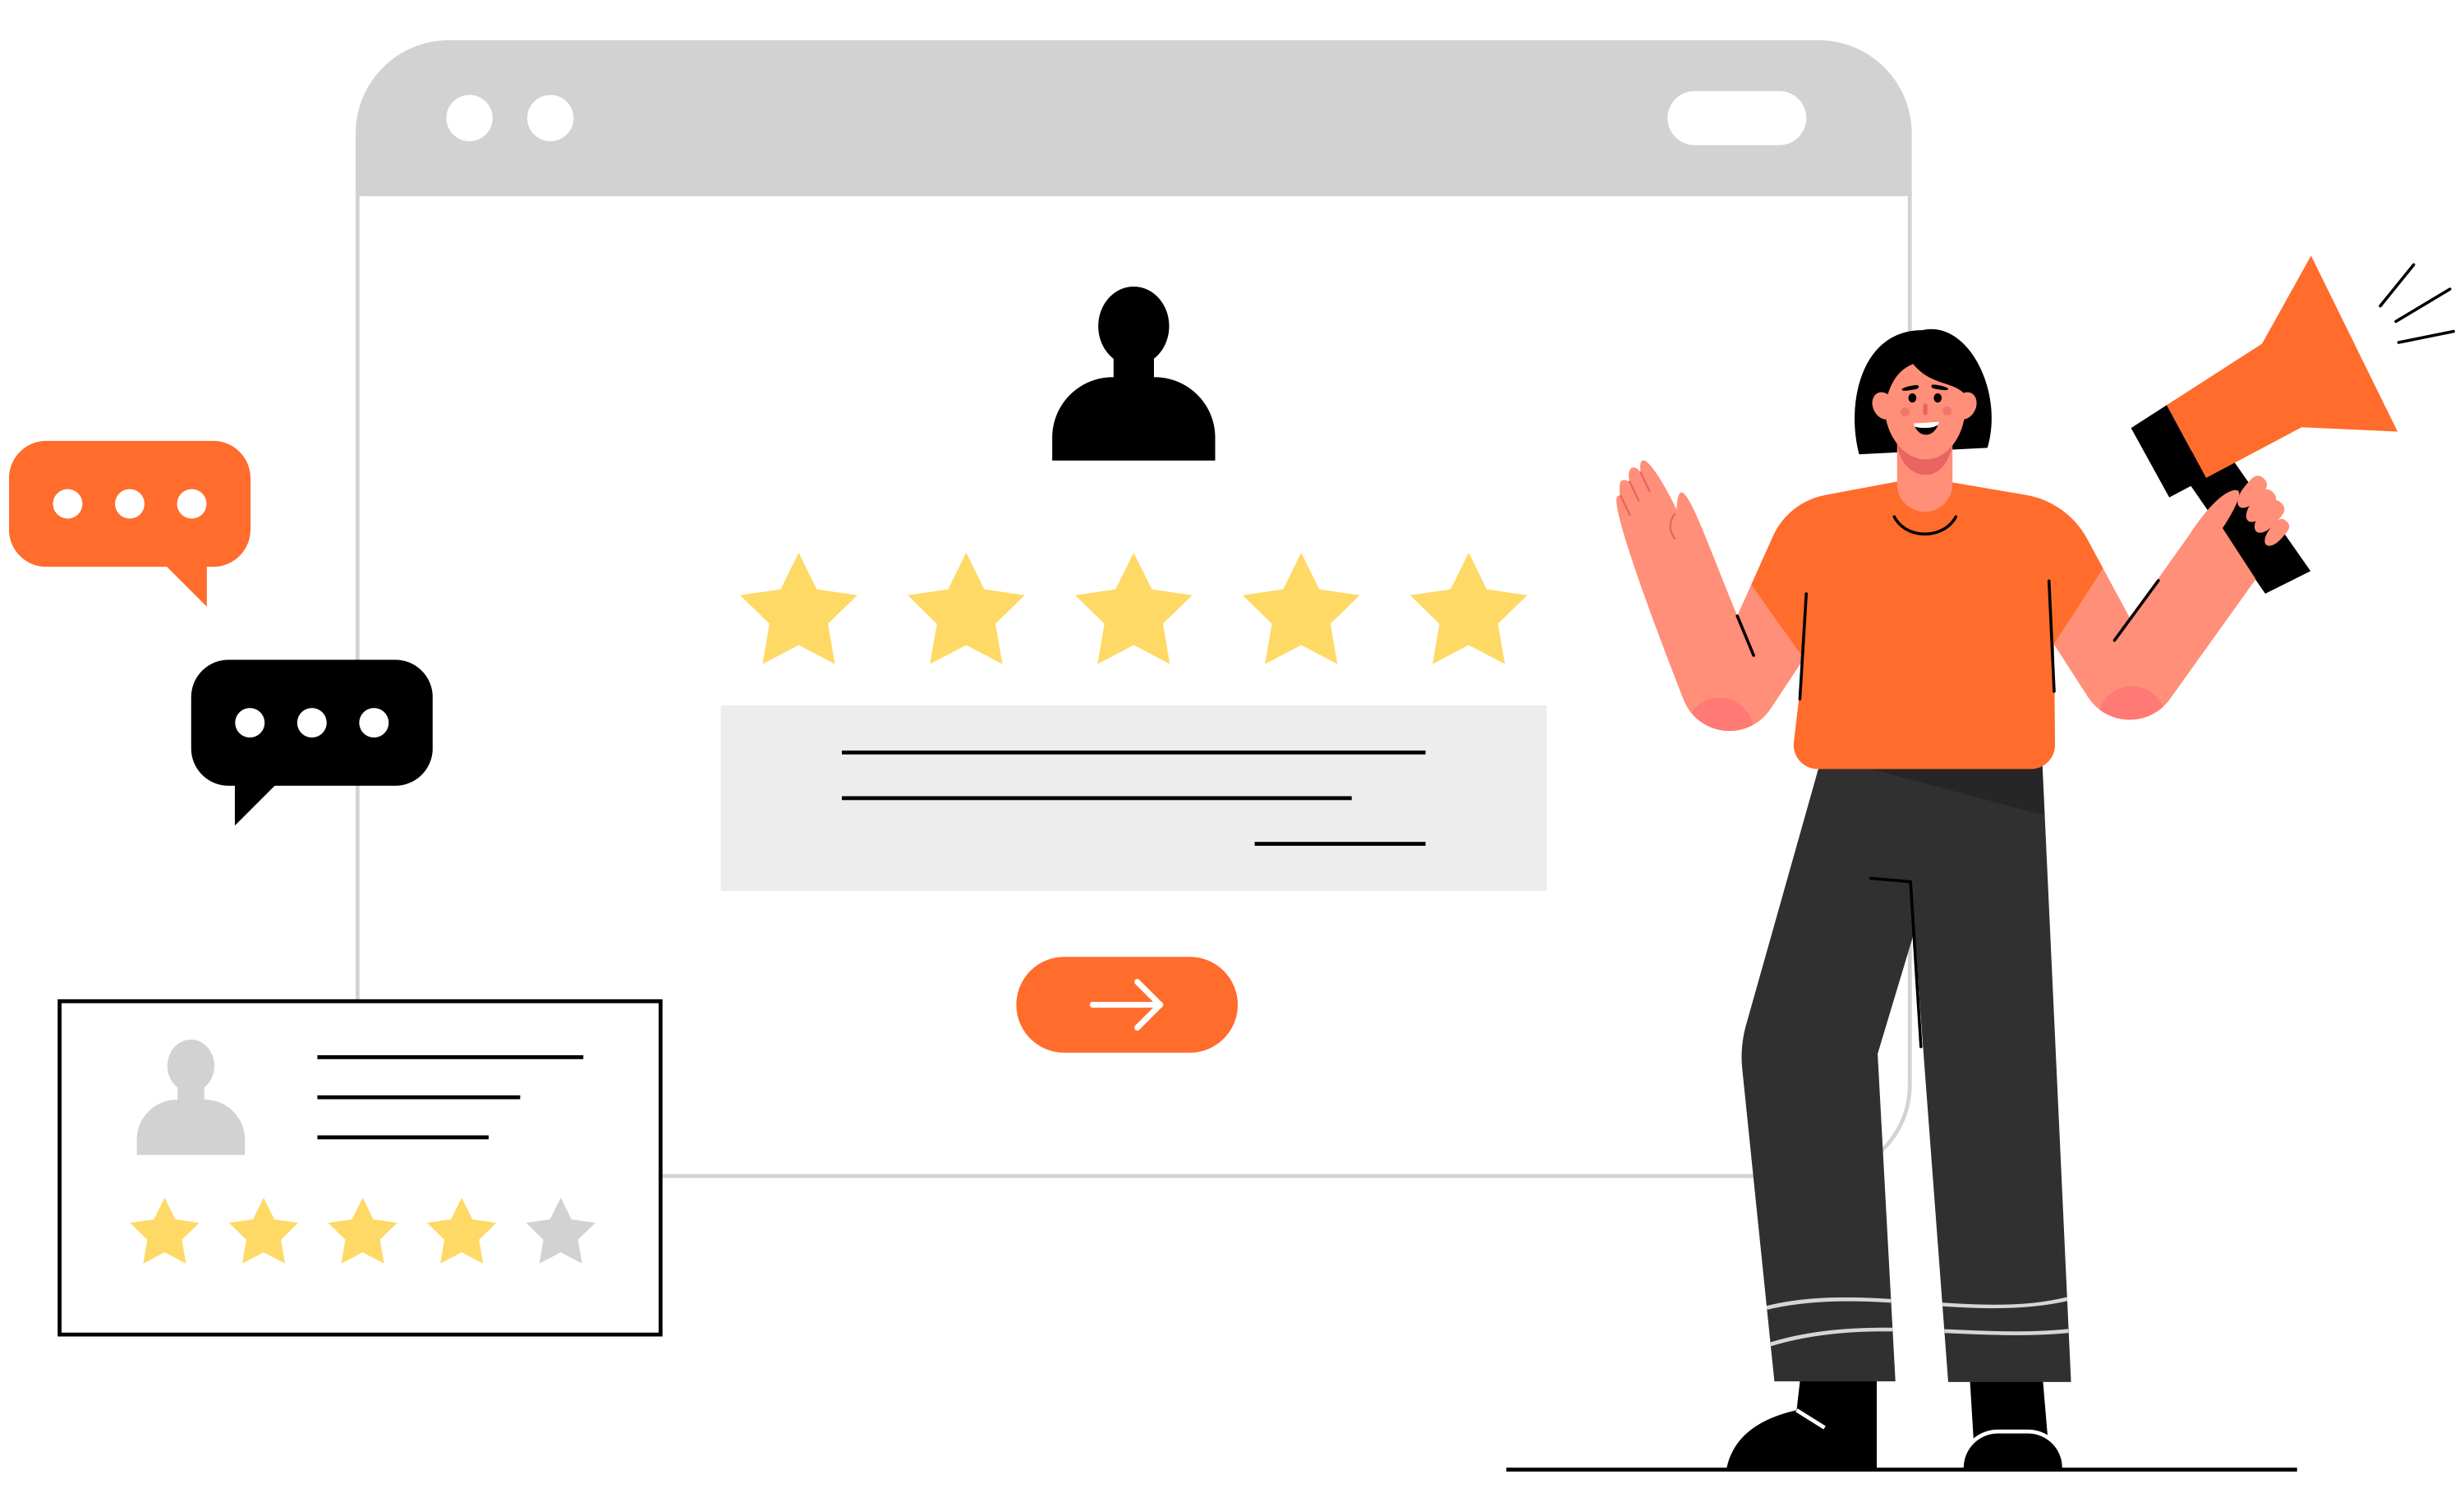 Build trust by receiving more reviews